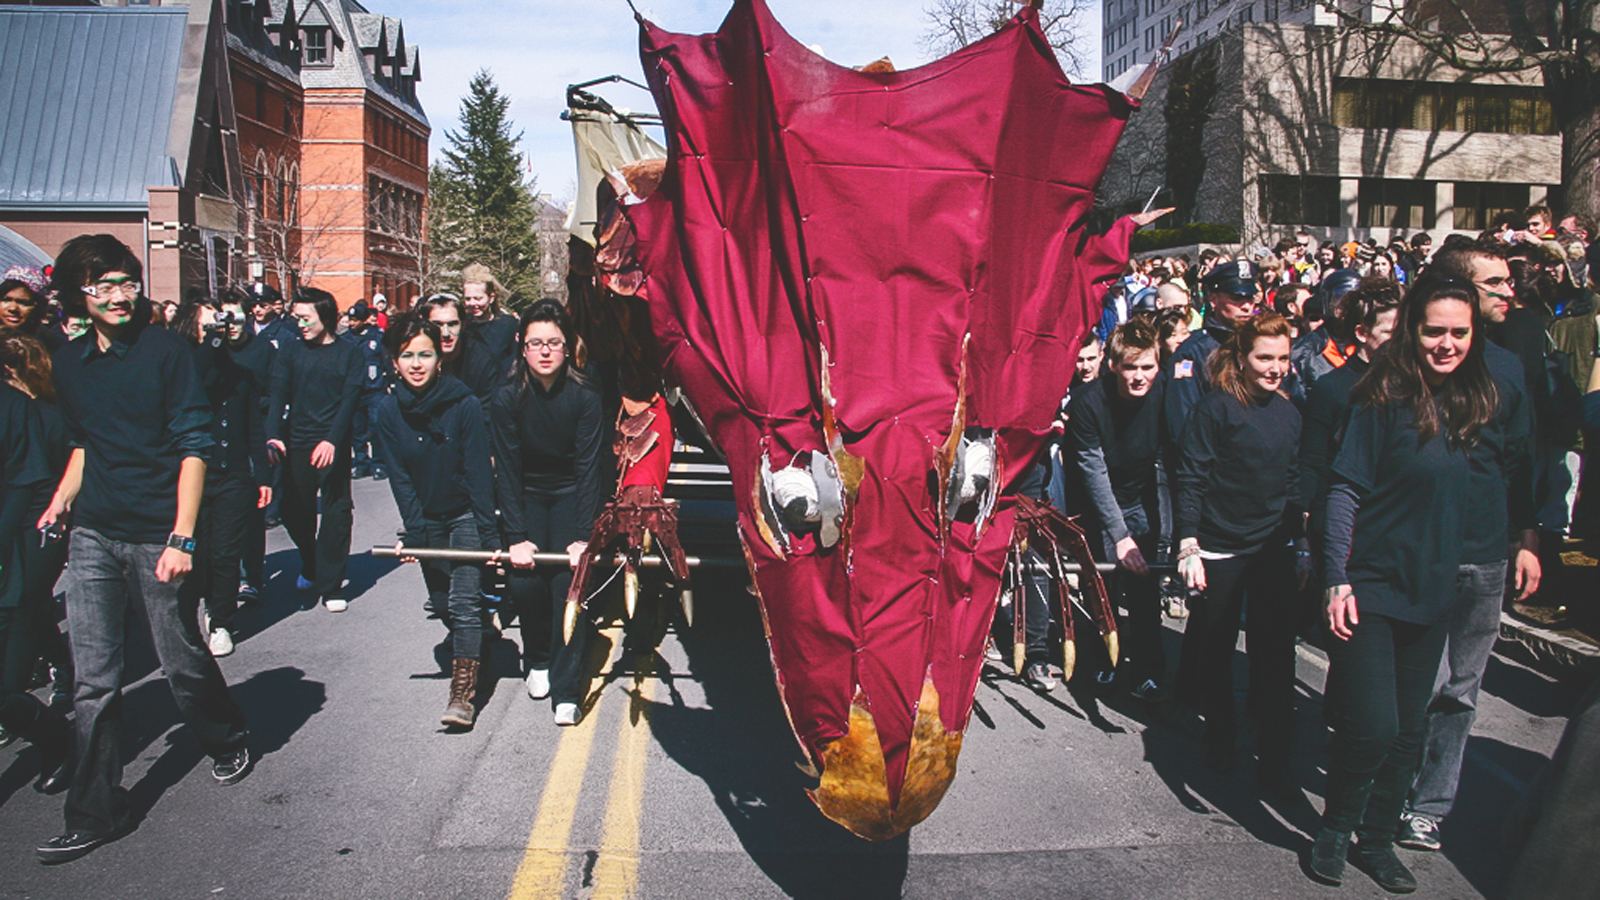 Students lead the dragon in 2009